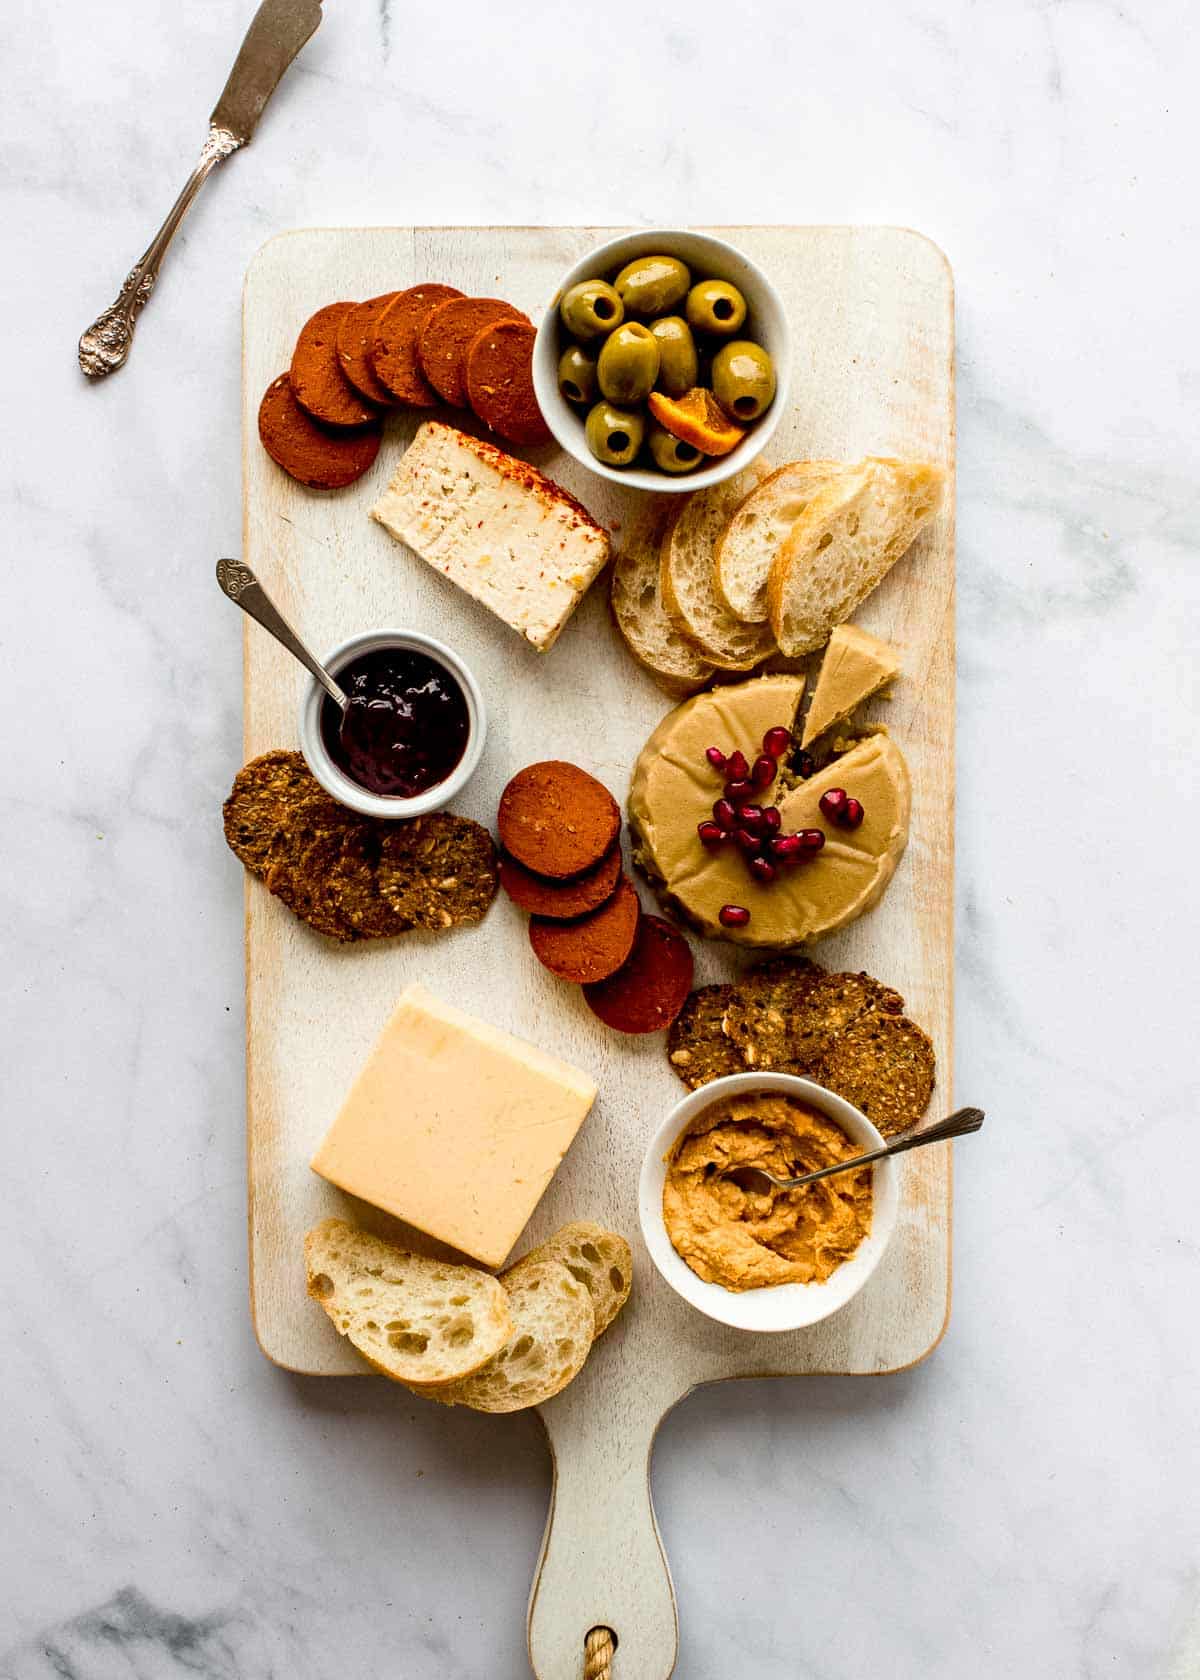 Three different types of cheeses, bread, crackers, olives, jam and pepperoni on a vegan platter.